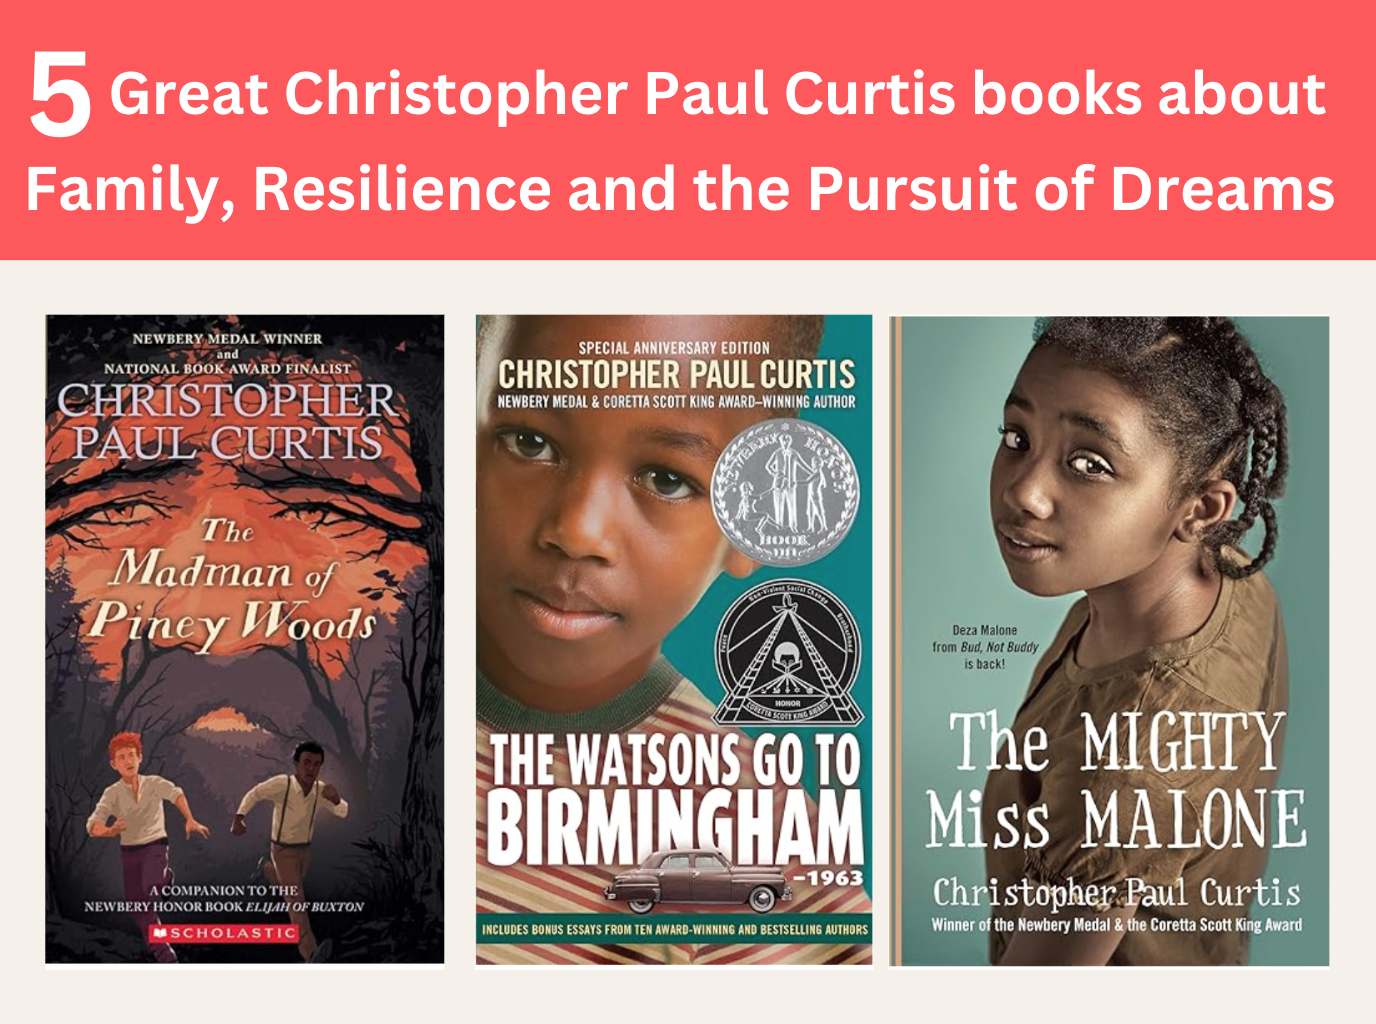 A selection of Christopher Paul Curtis book covers